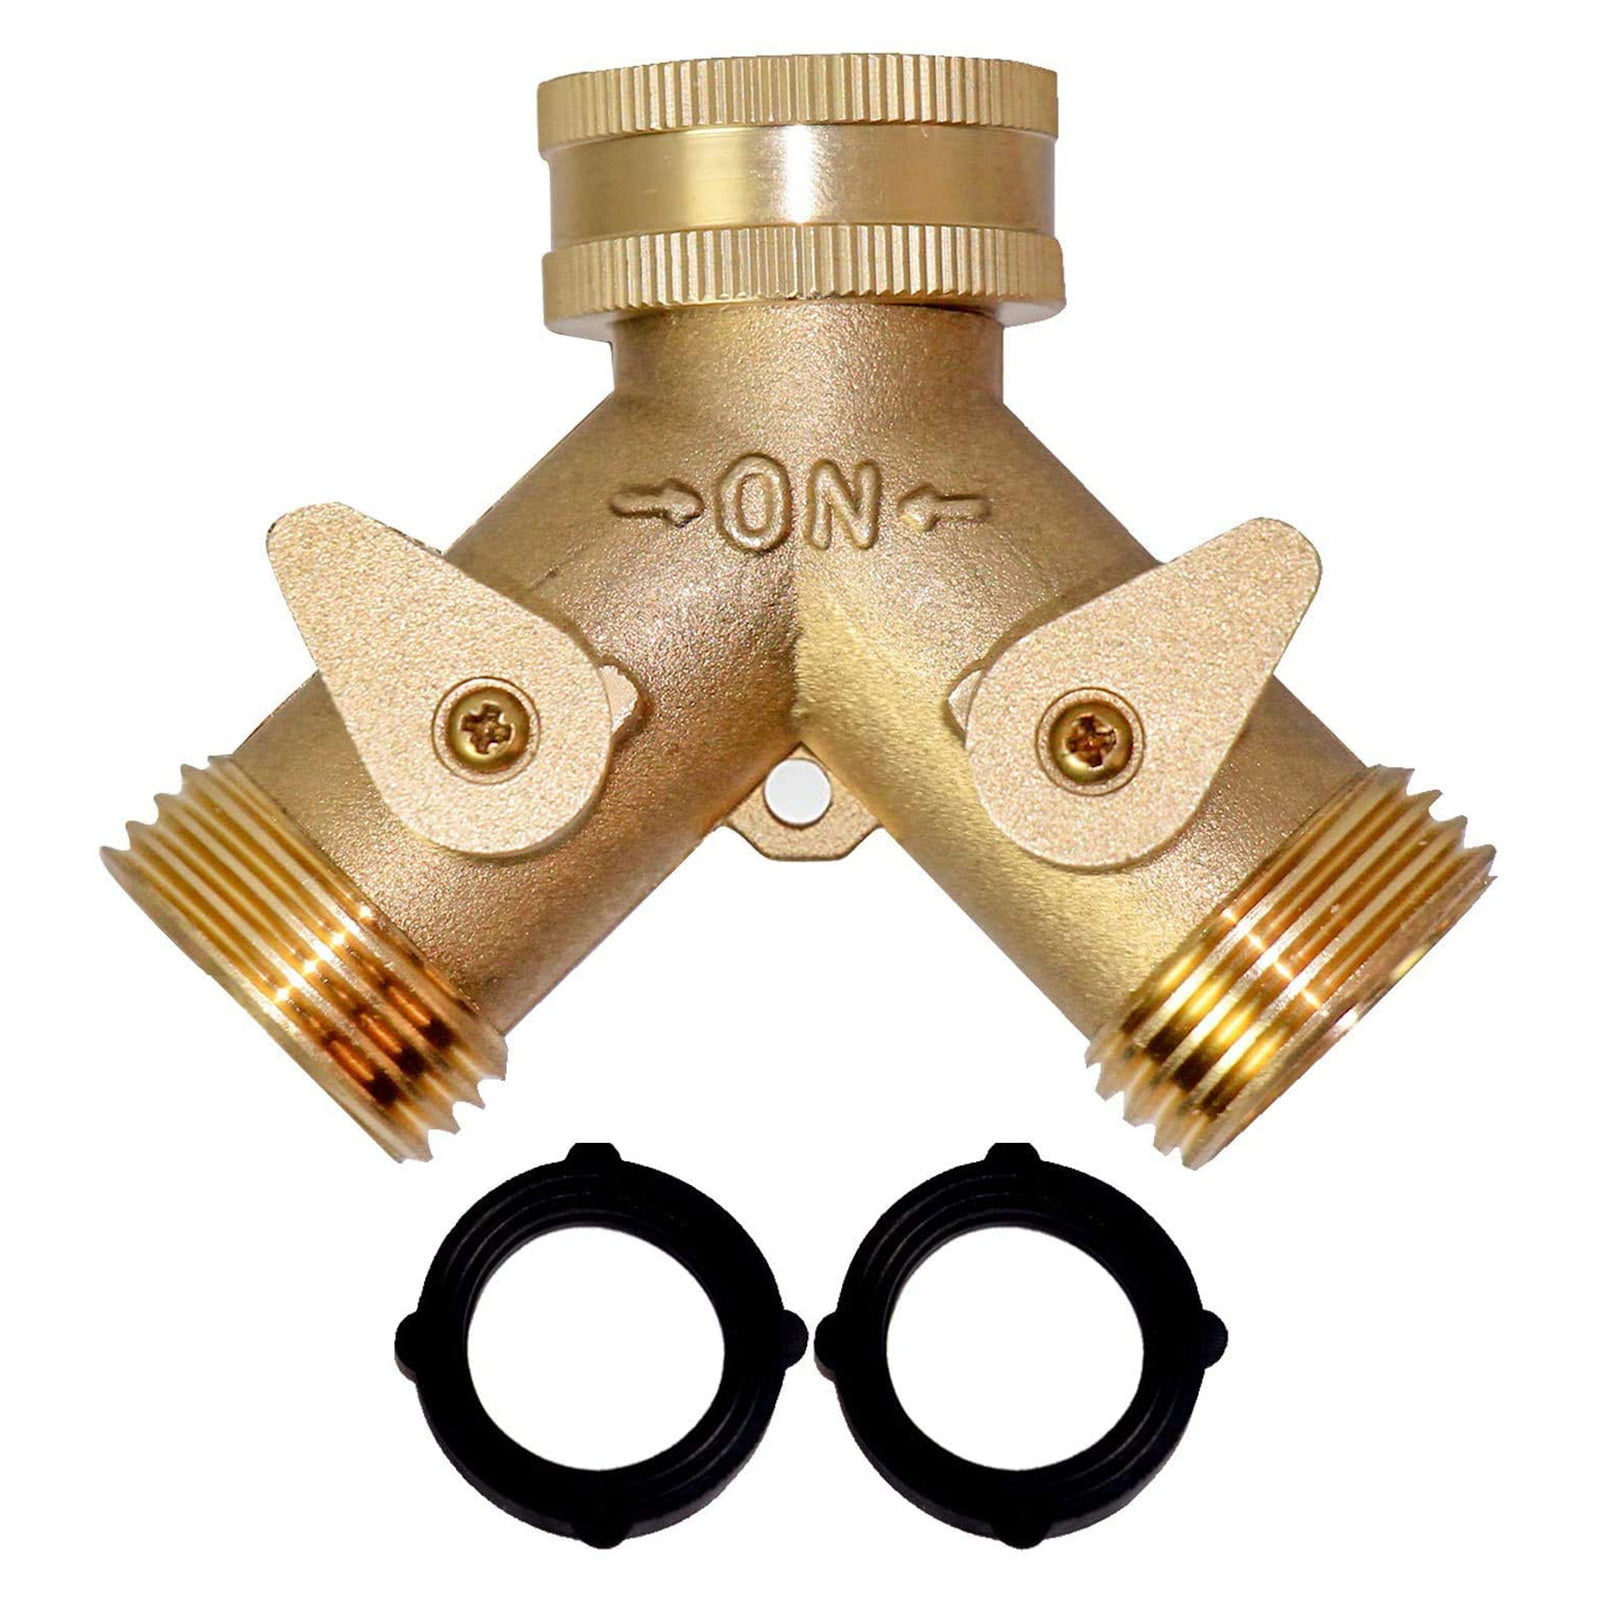 Solid brass 4 way tap splitter with  independently controlled threaded outlets 